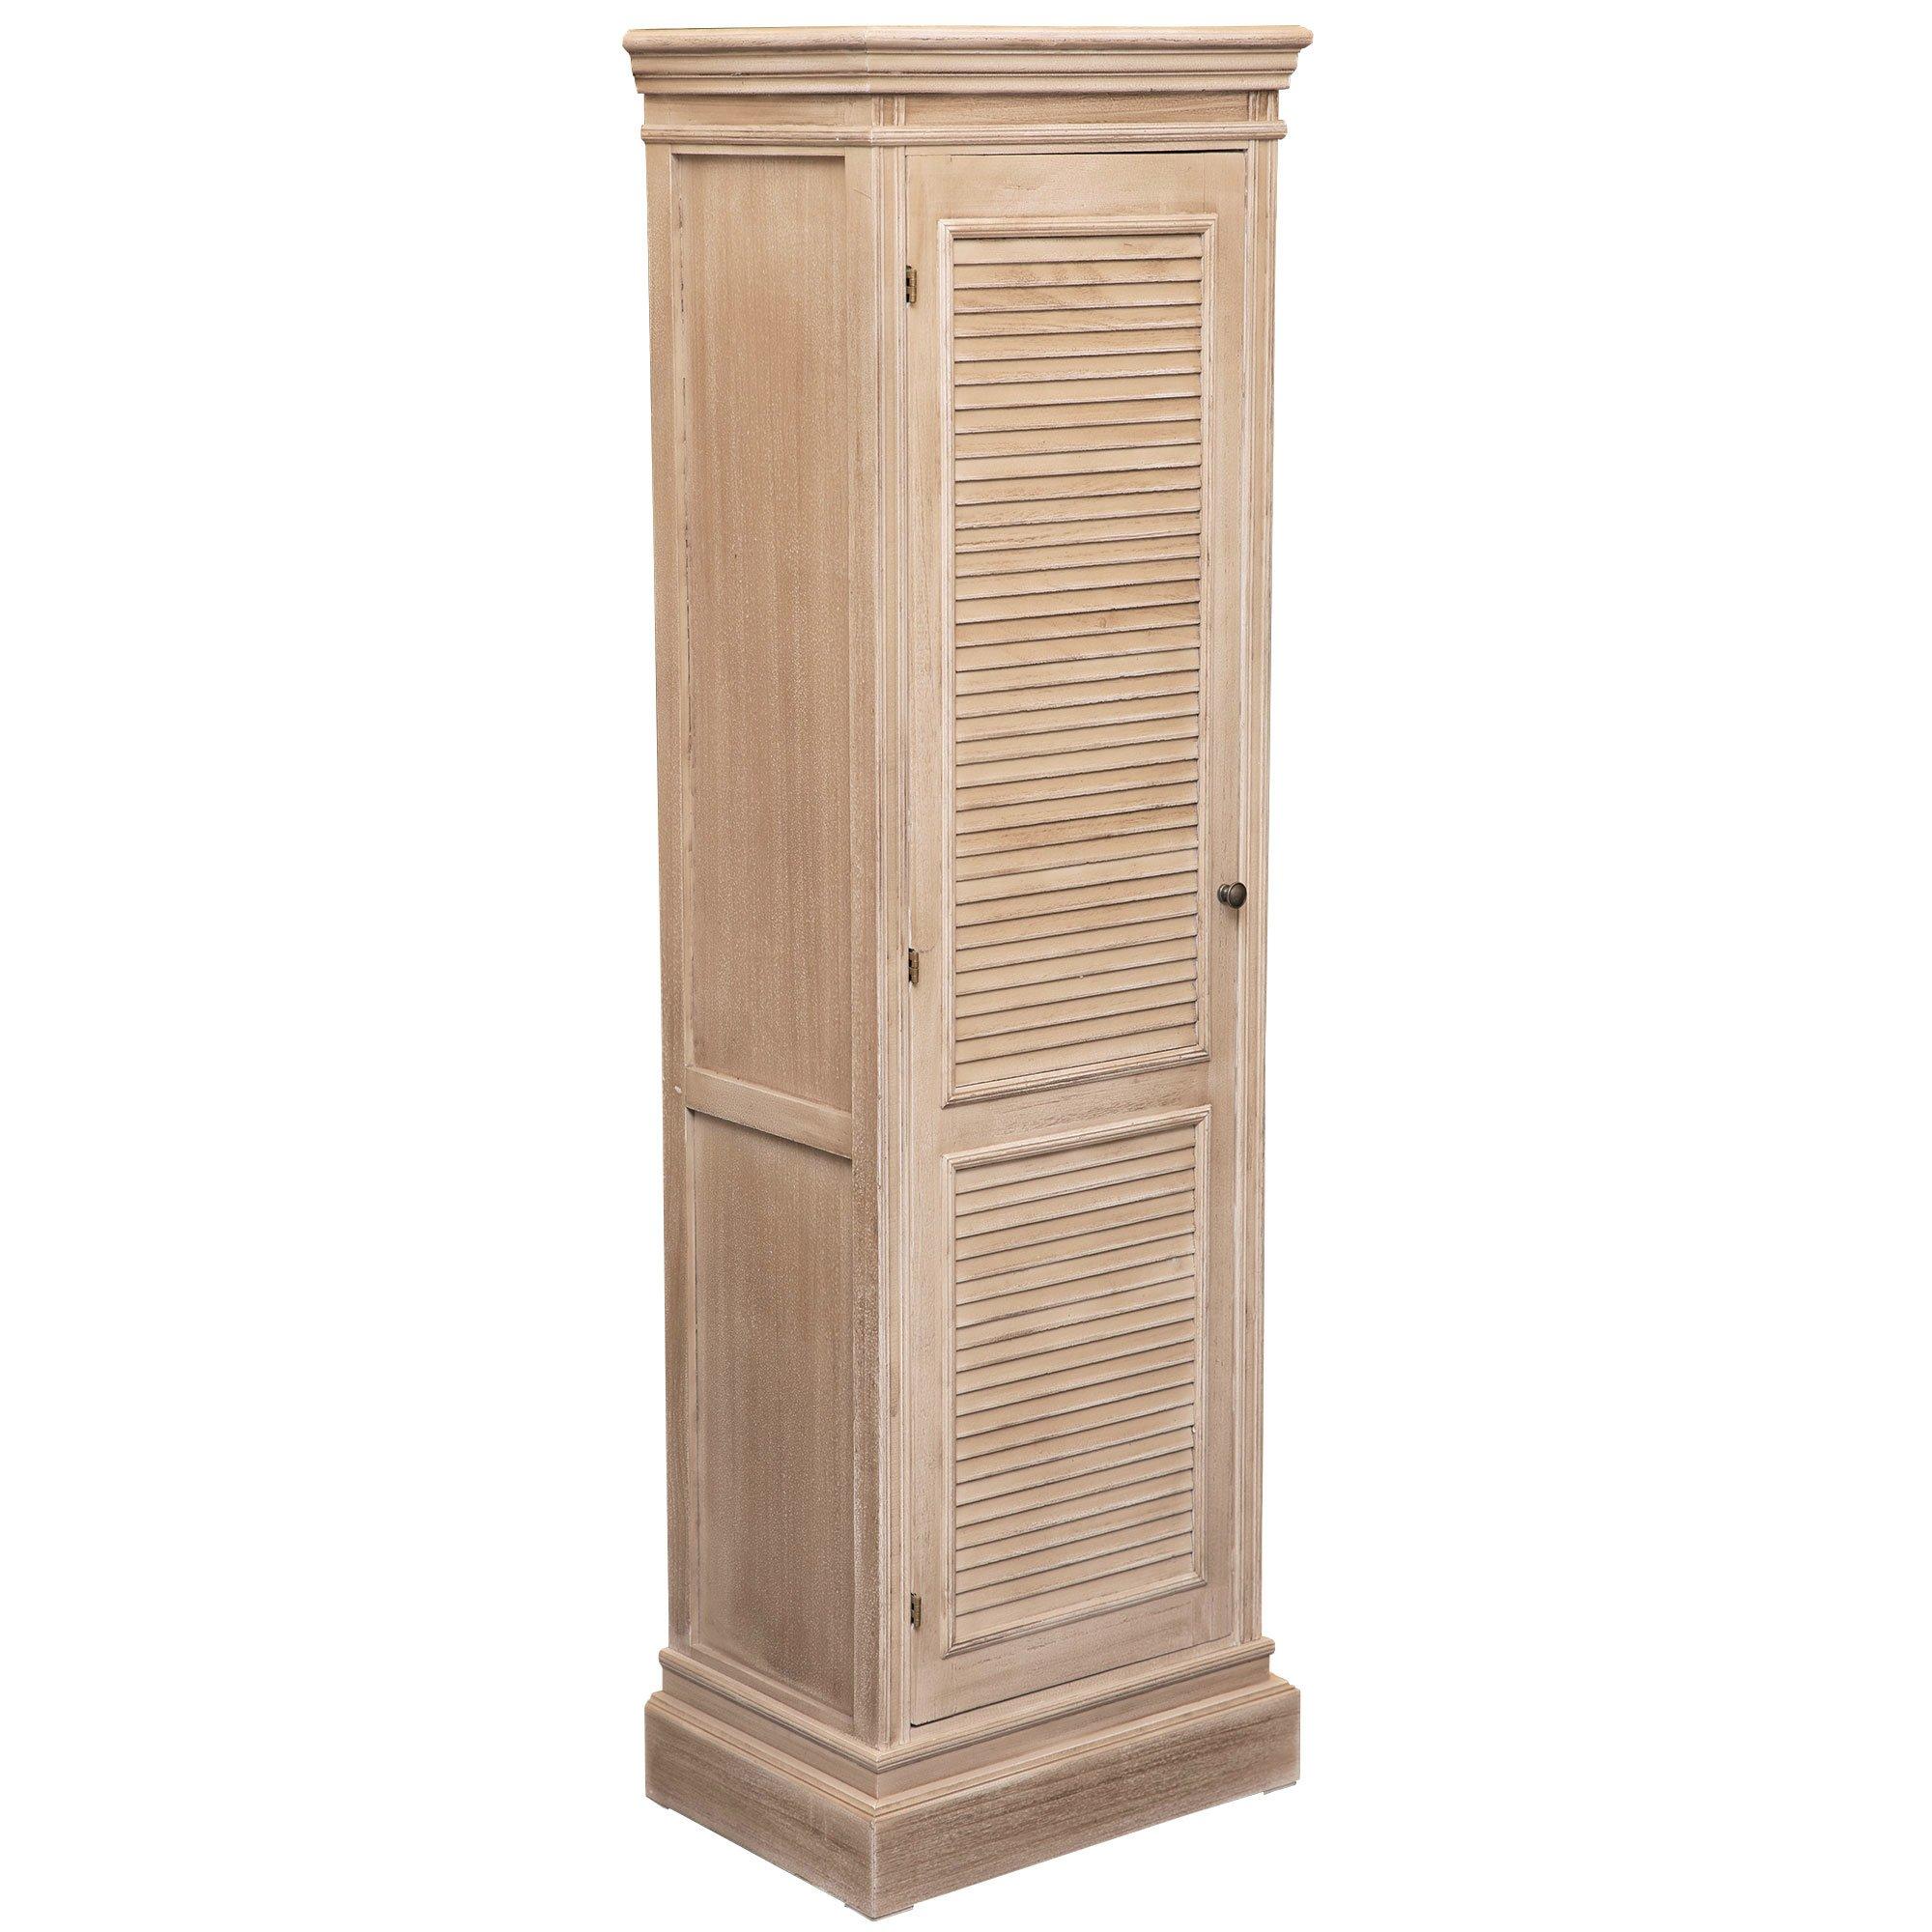 White Cabinet With Bright Drawers, Hobby Lobby